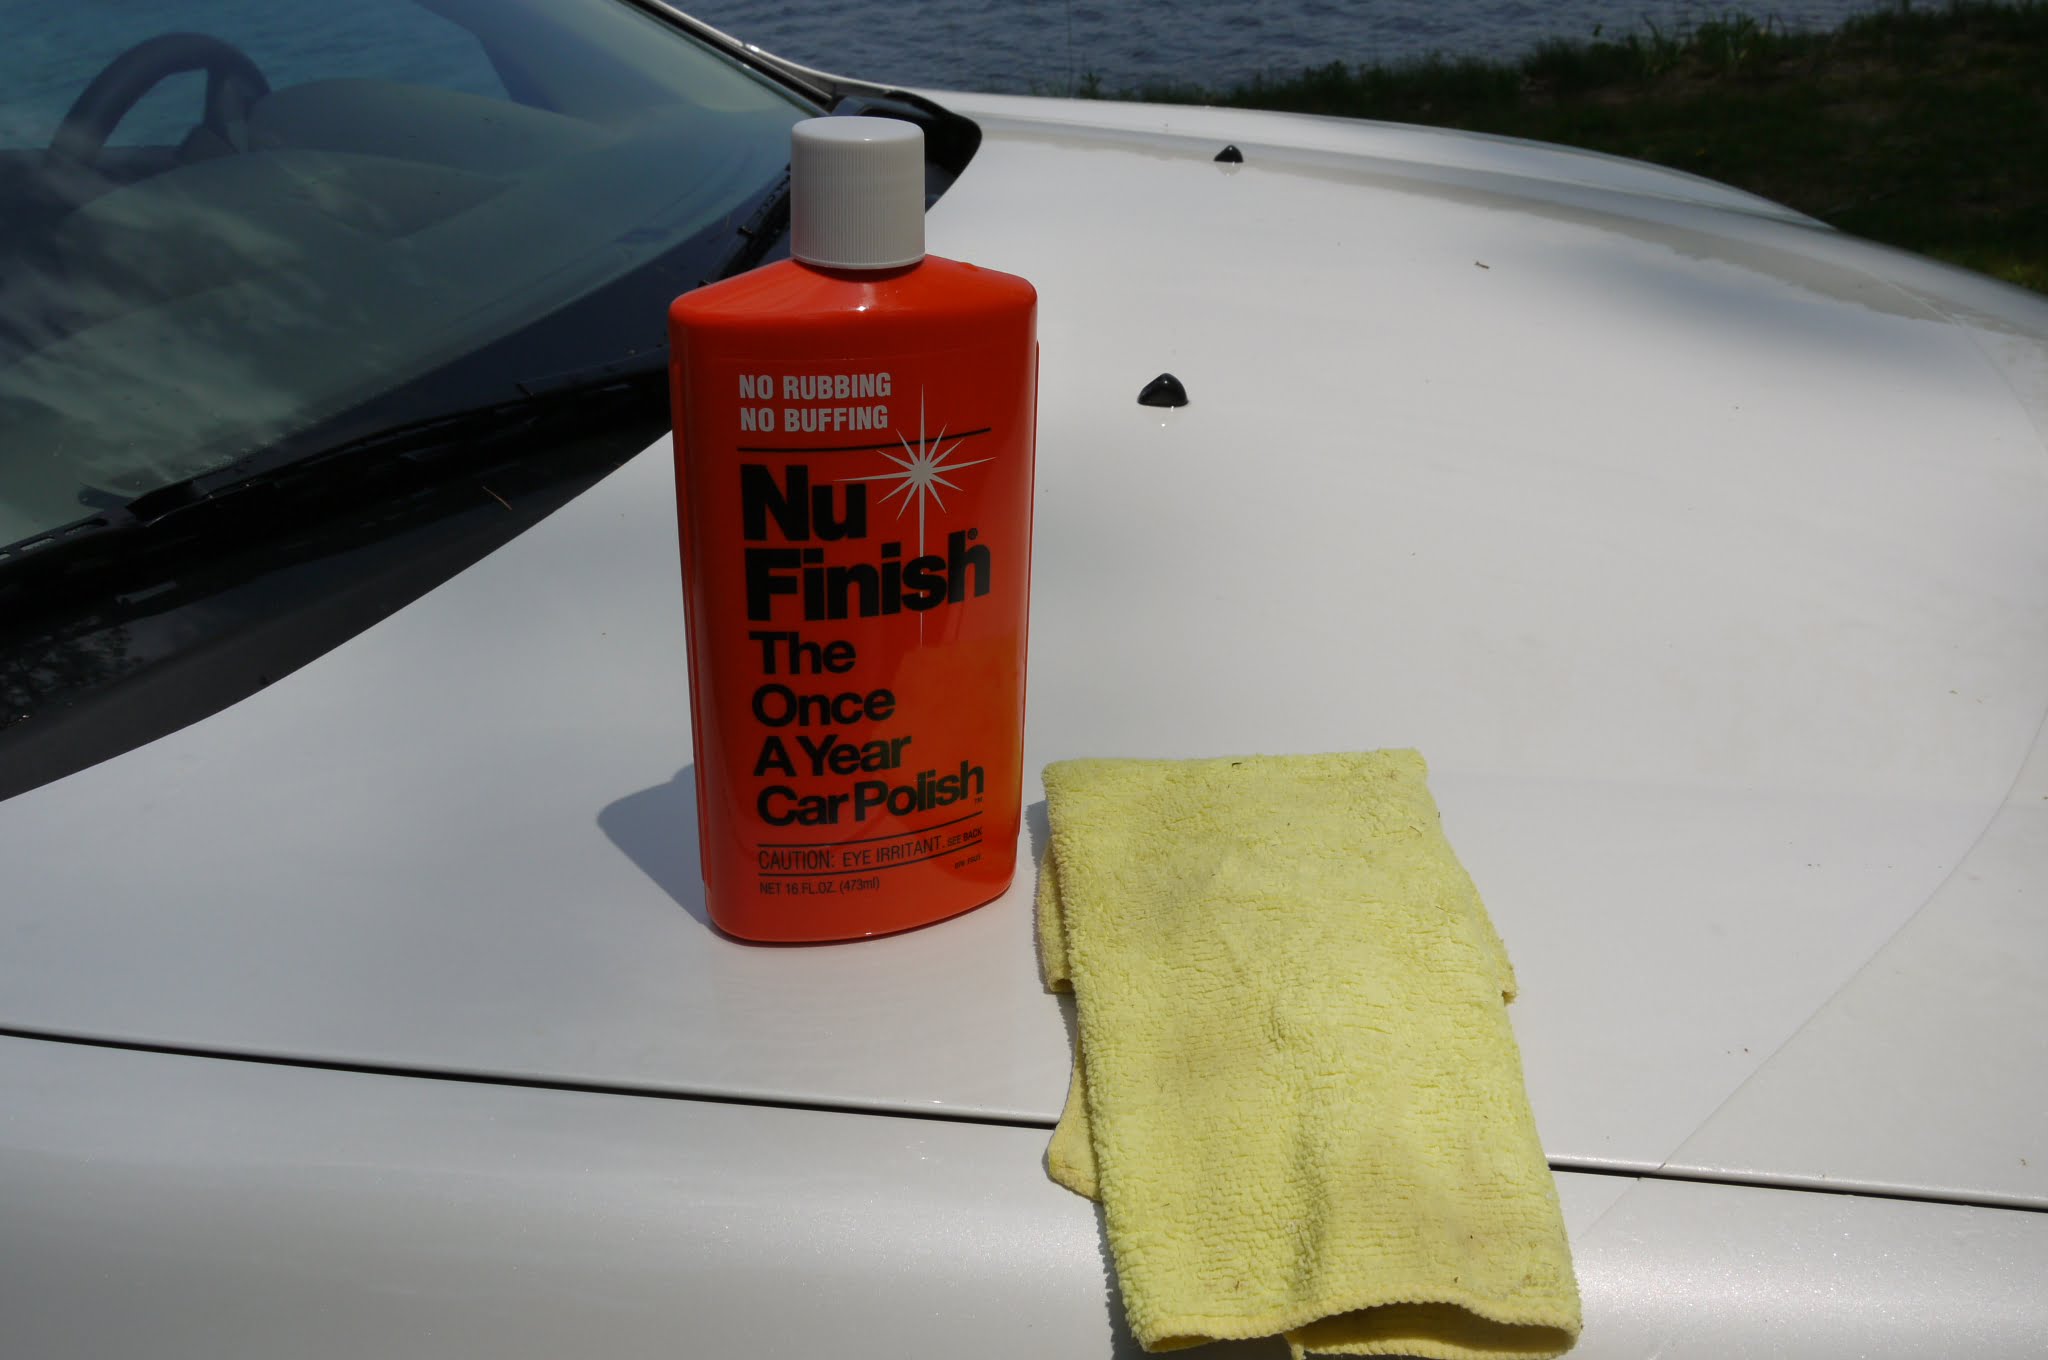 How Students in Auto Body Training Can Get Rid of Tree Sap